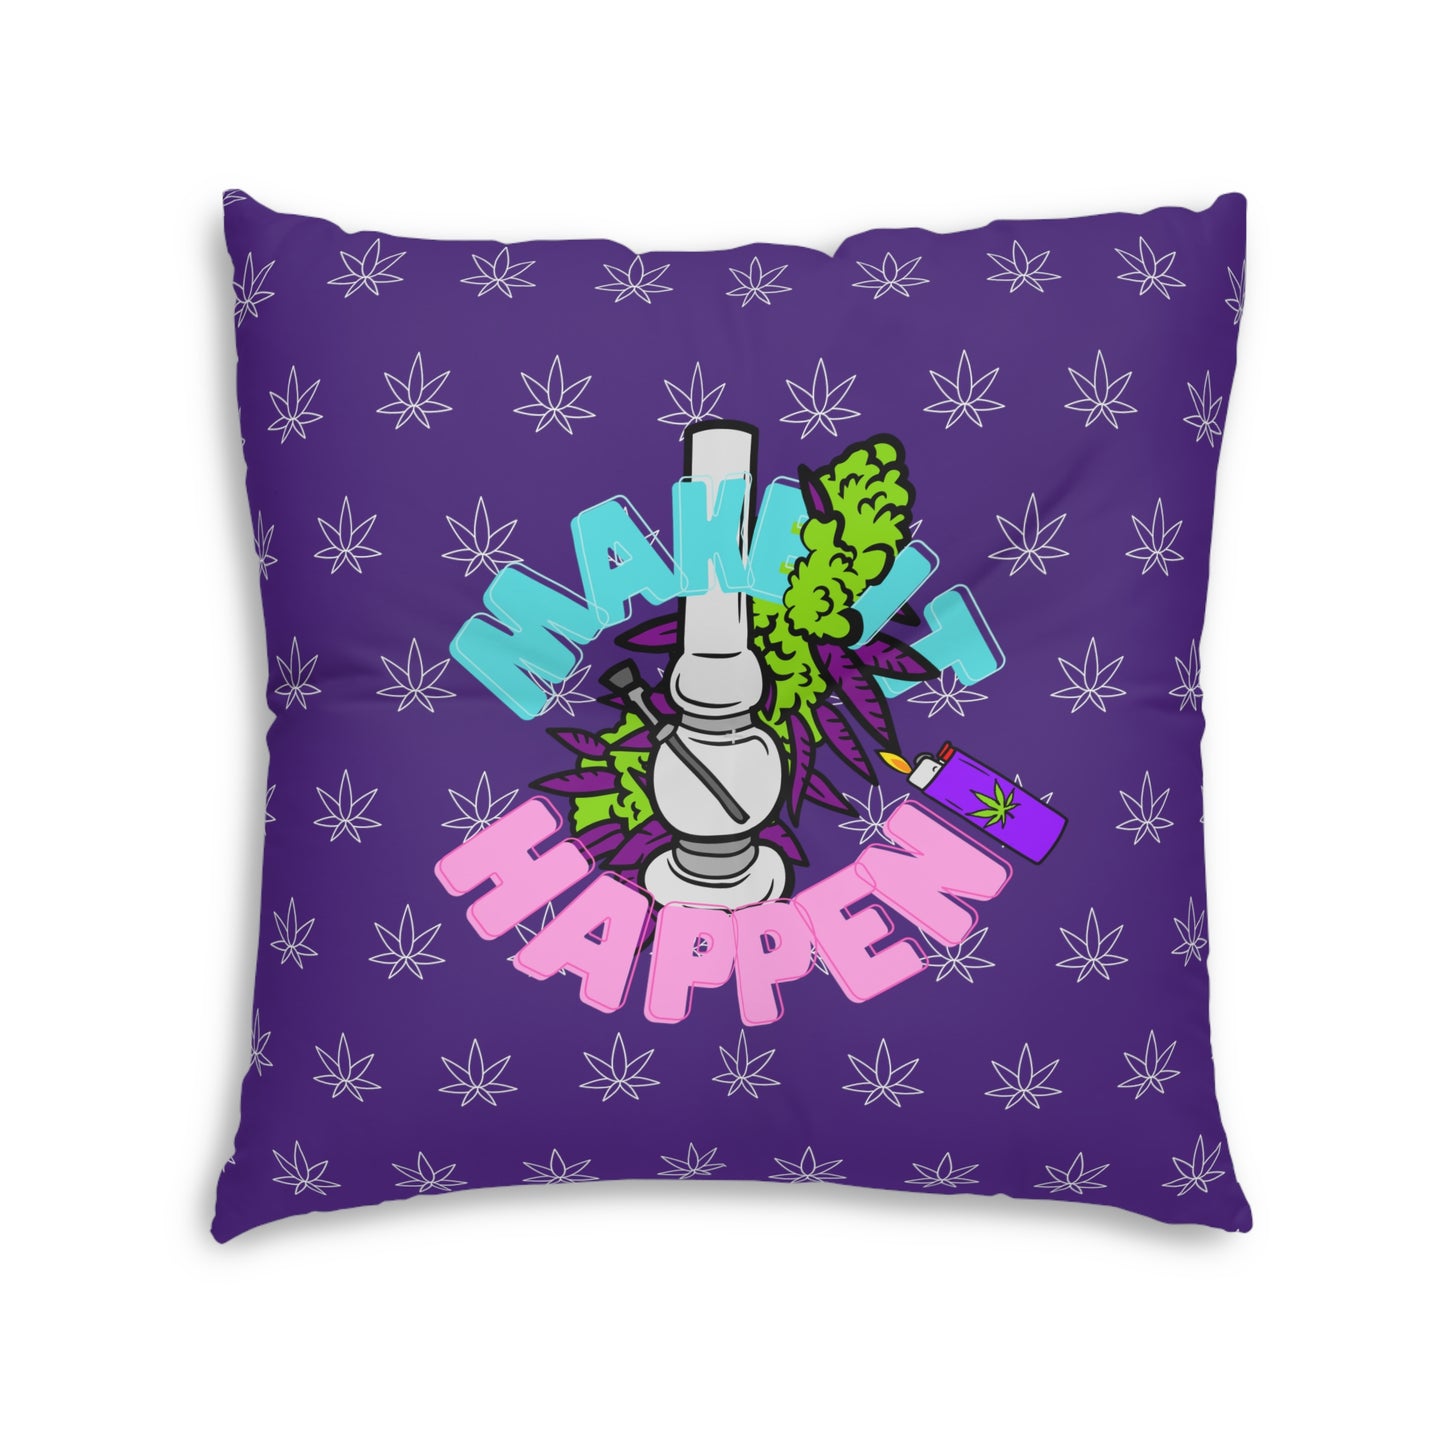 A purple Make It Happen Cannabis tufted floor pillow featuring a graphic of a spray paint can and paint splatter with the phrase "make it happen" in stylized text surrounded by white stars.